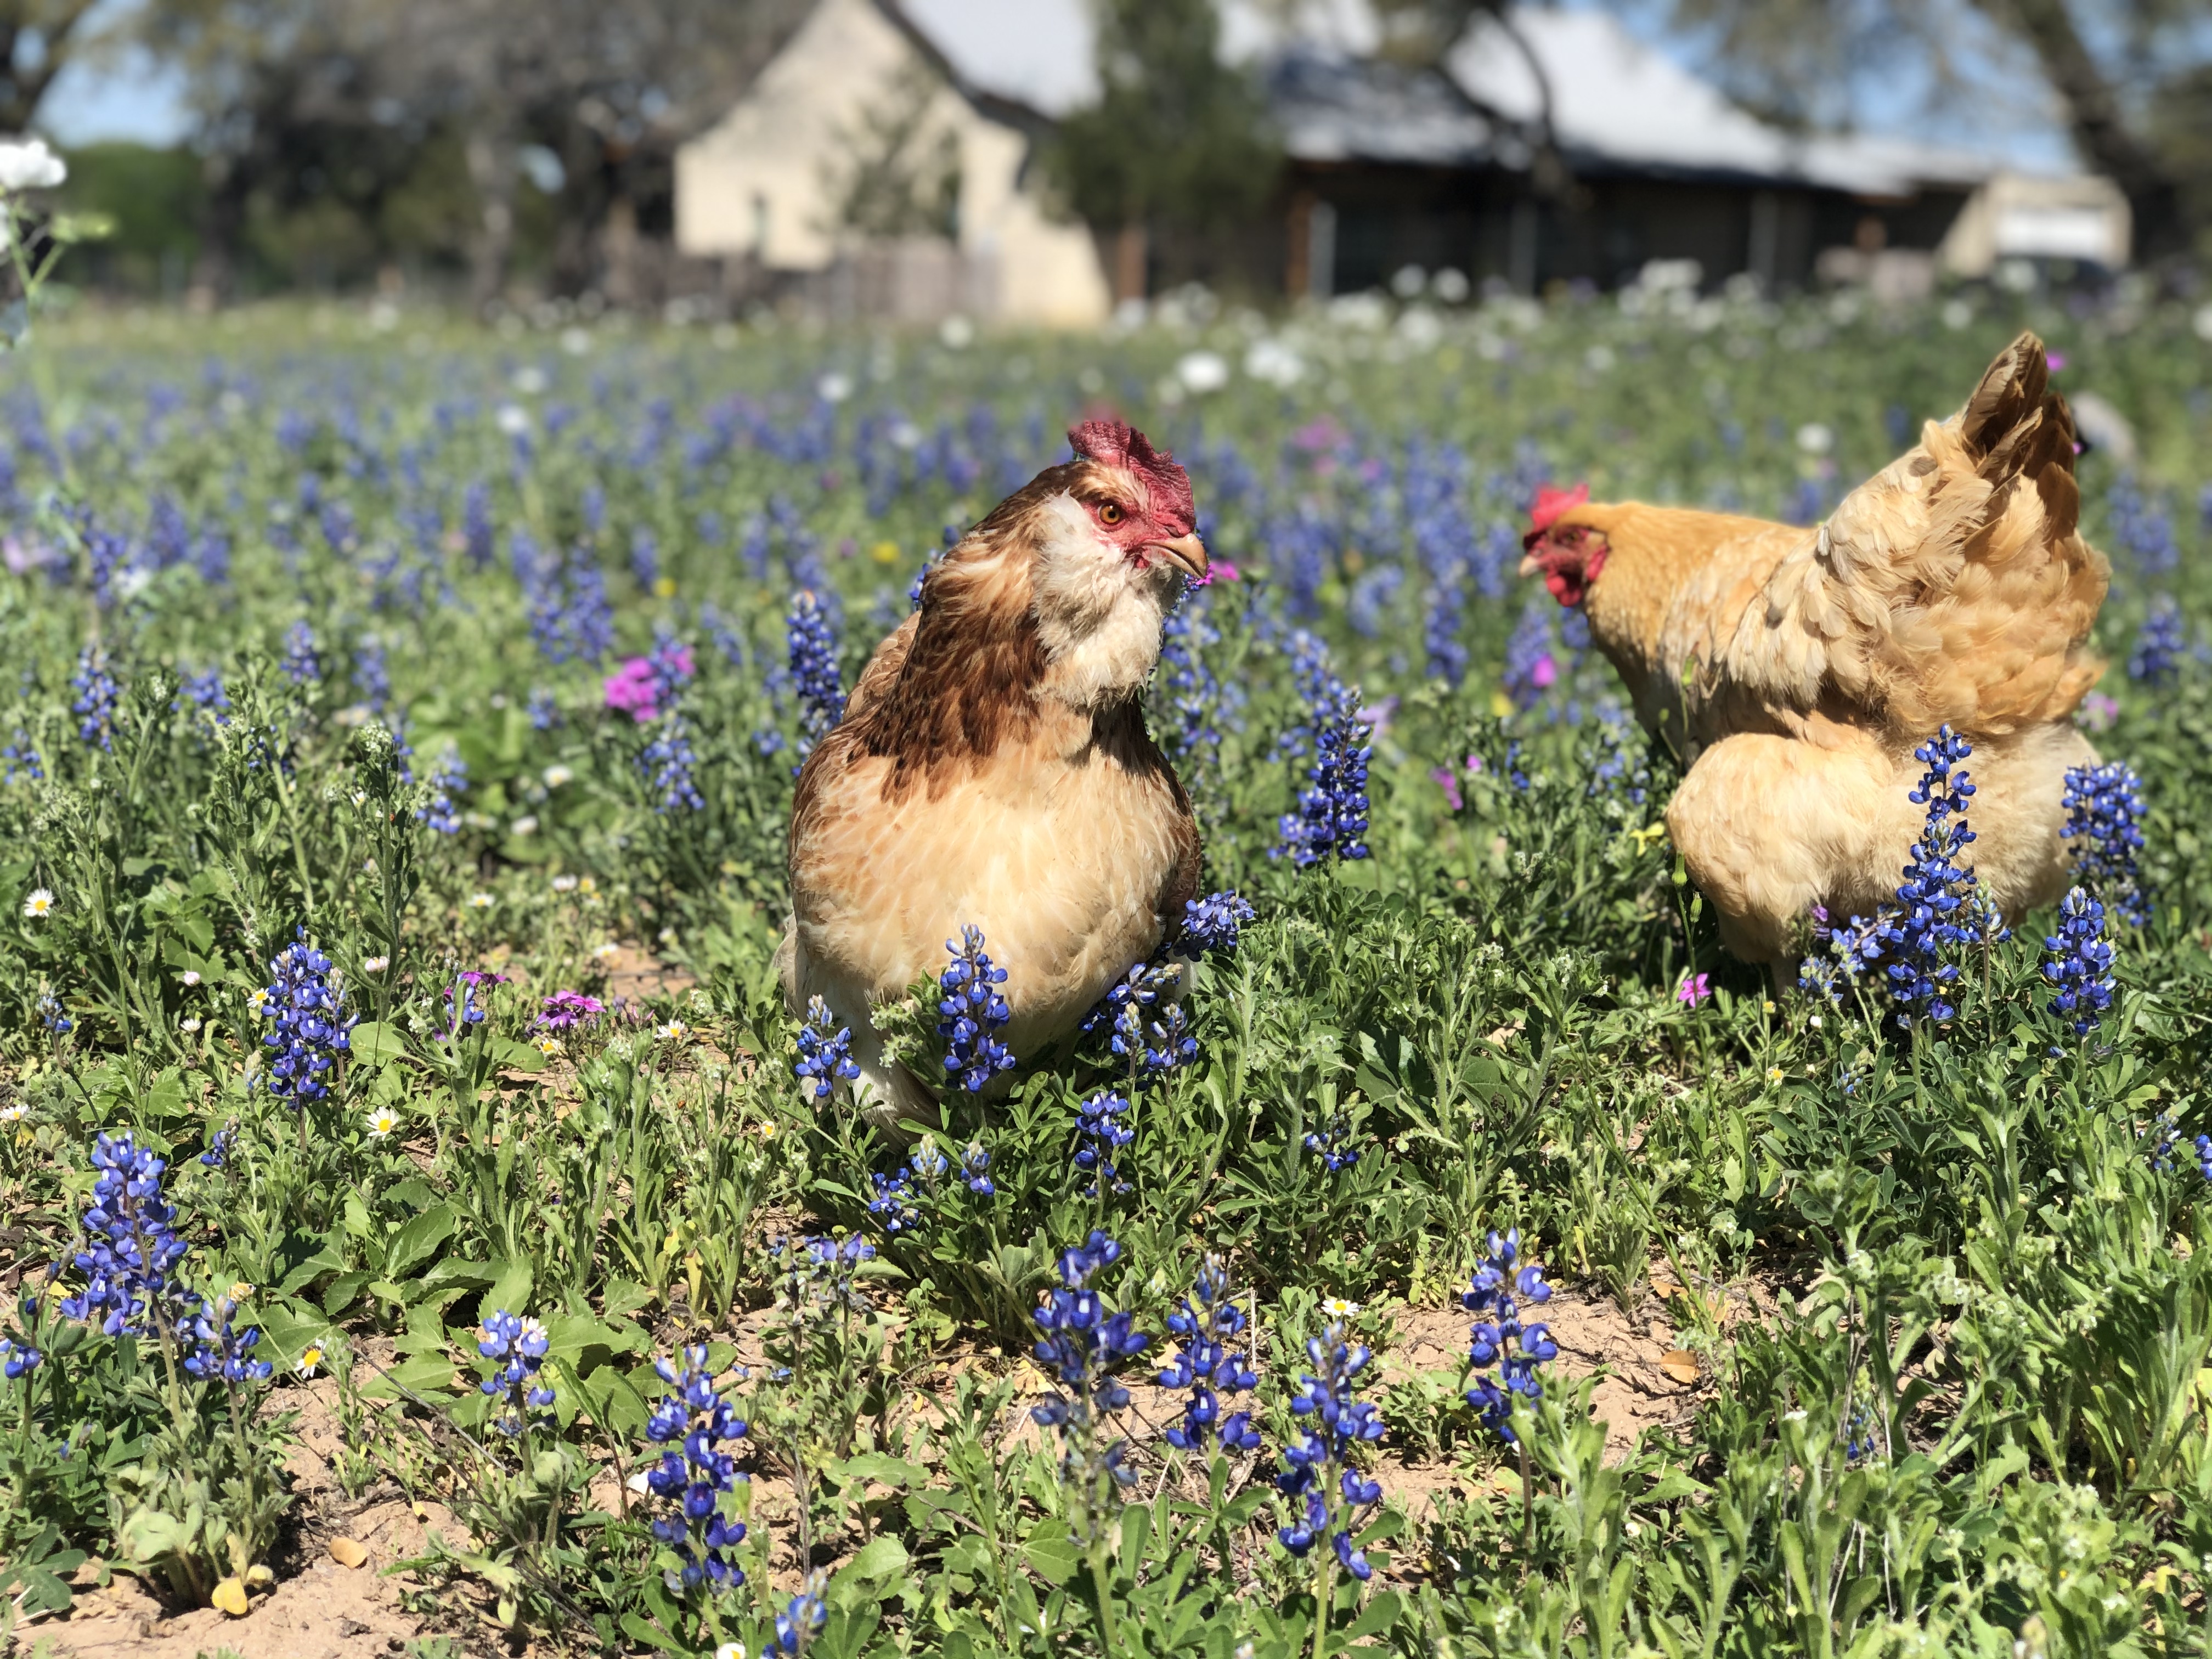 Bluebonnets and chickens